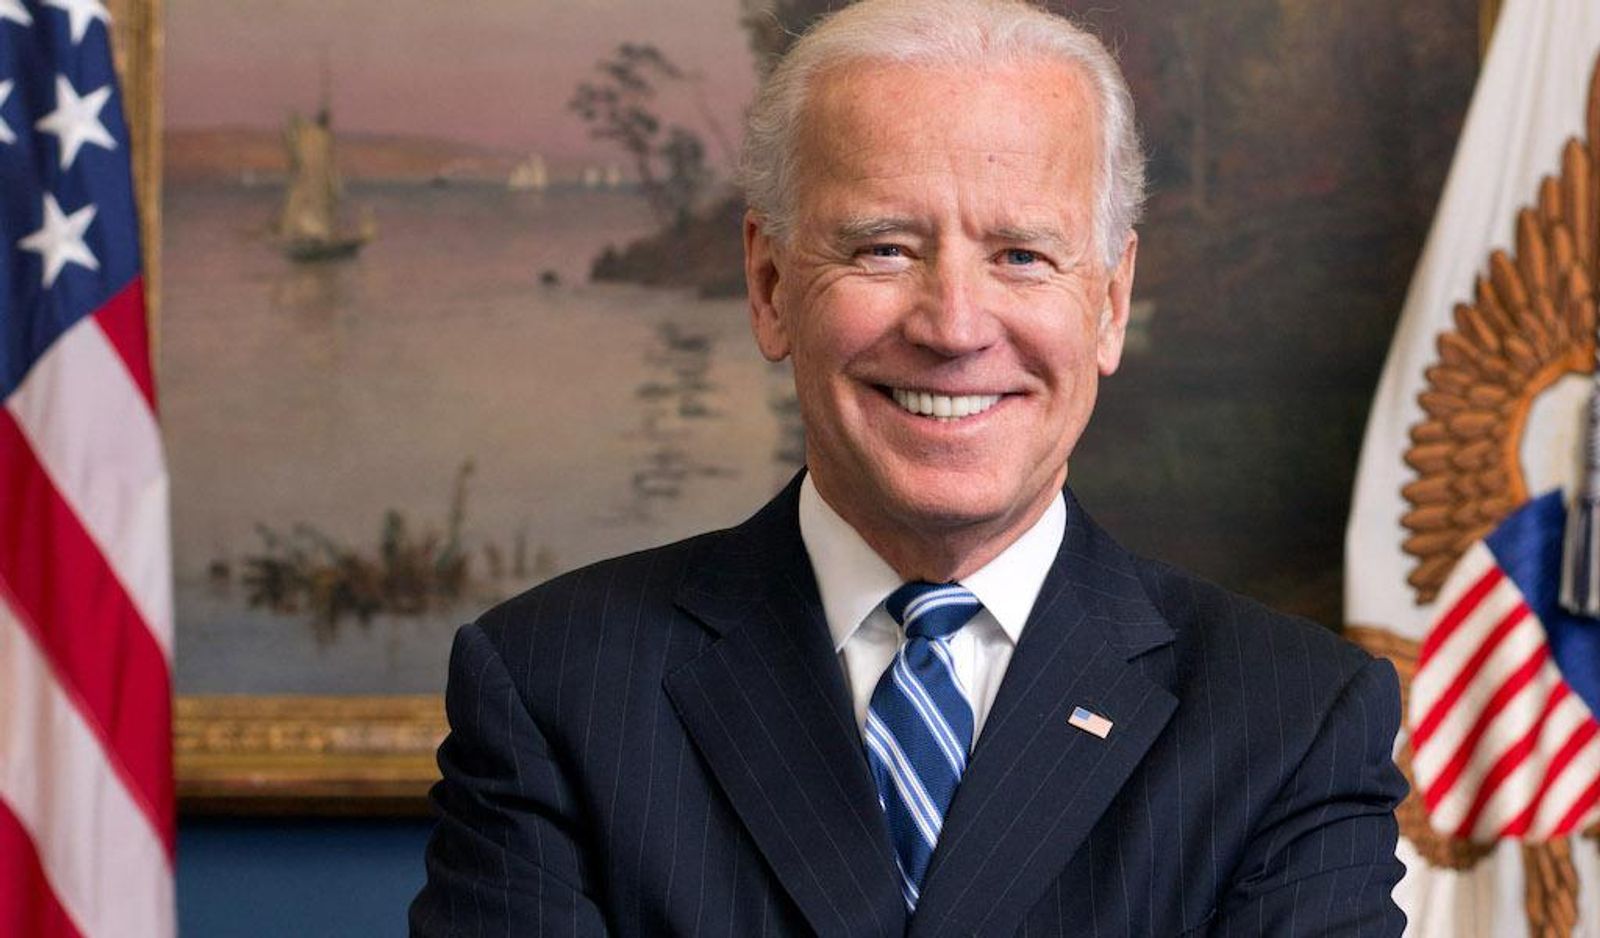 Biden Now Backs Net Neutrality, But Appears To Oppose Section 230